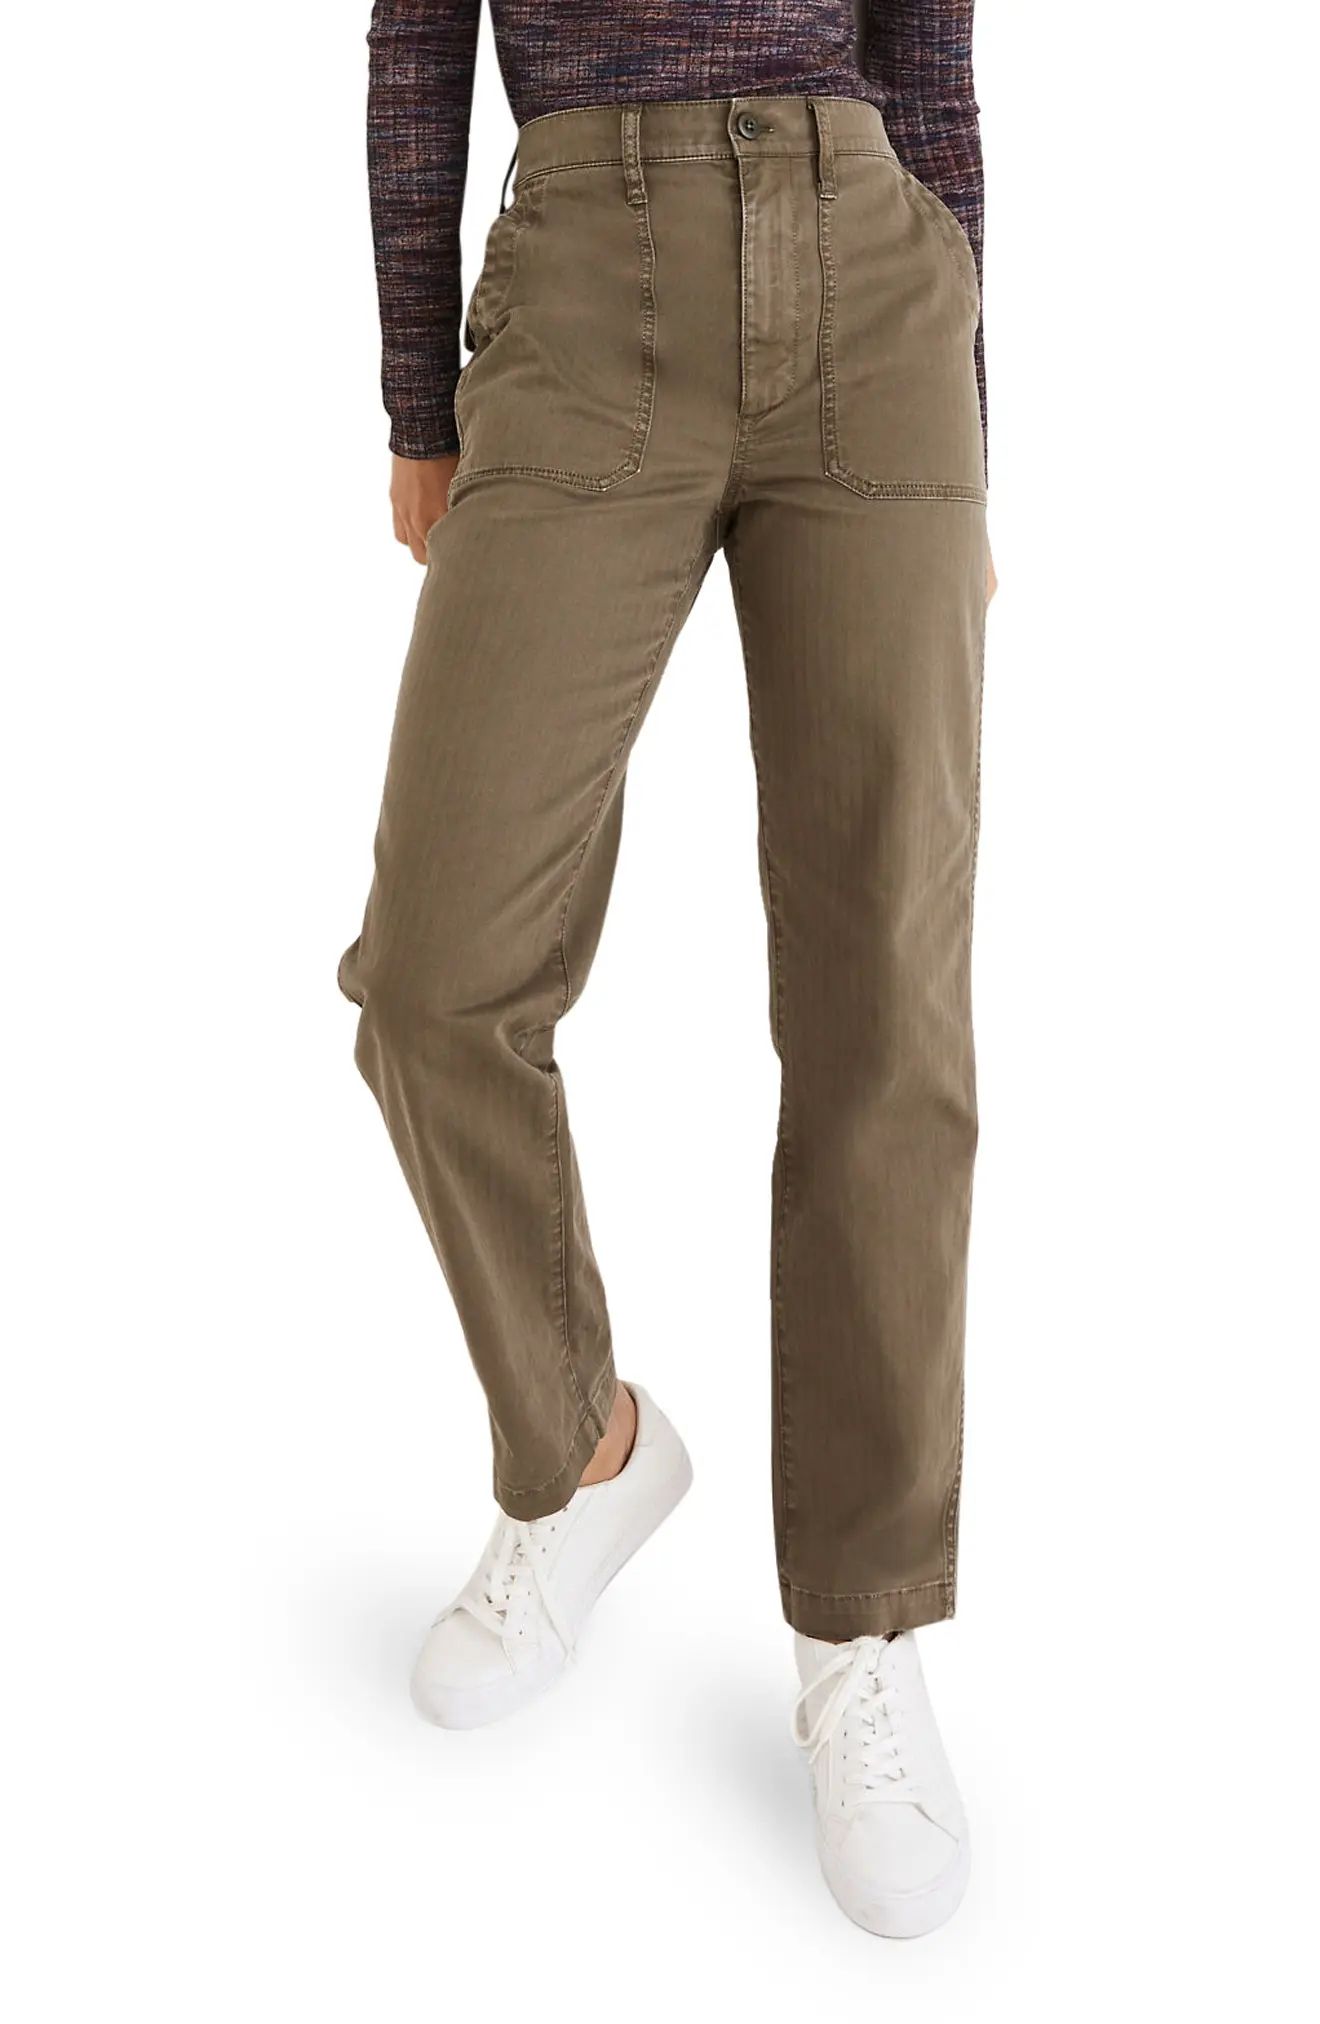 Madewell The Perfect Straight Workwear Pant in Capers at Nordstrom, Size 23 | Nordstrom